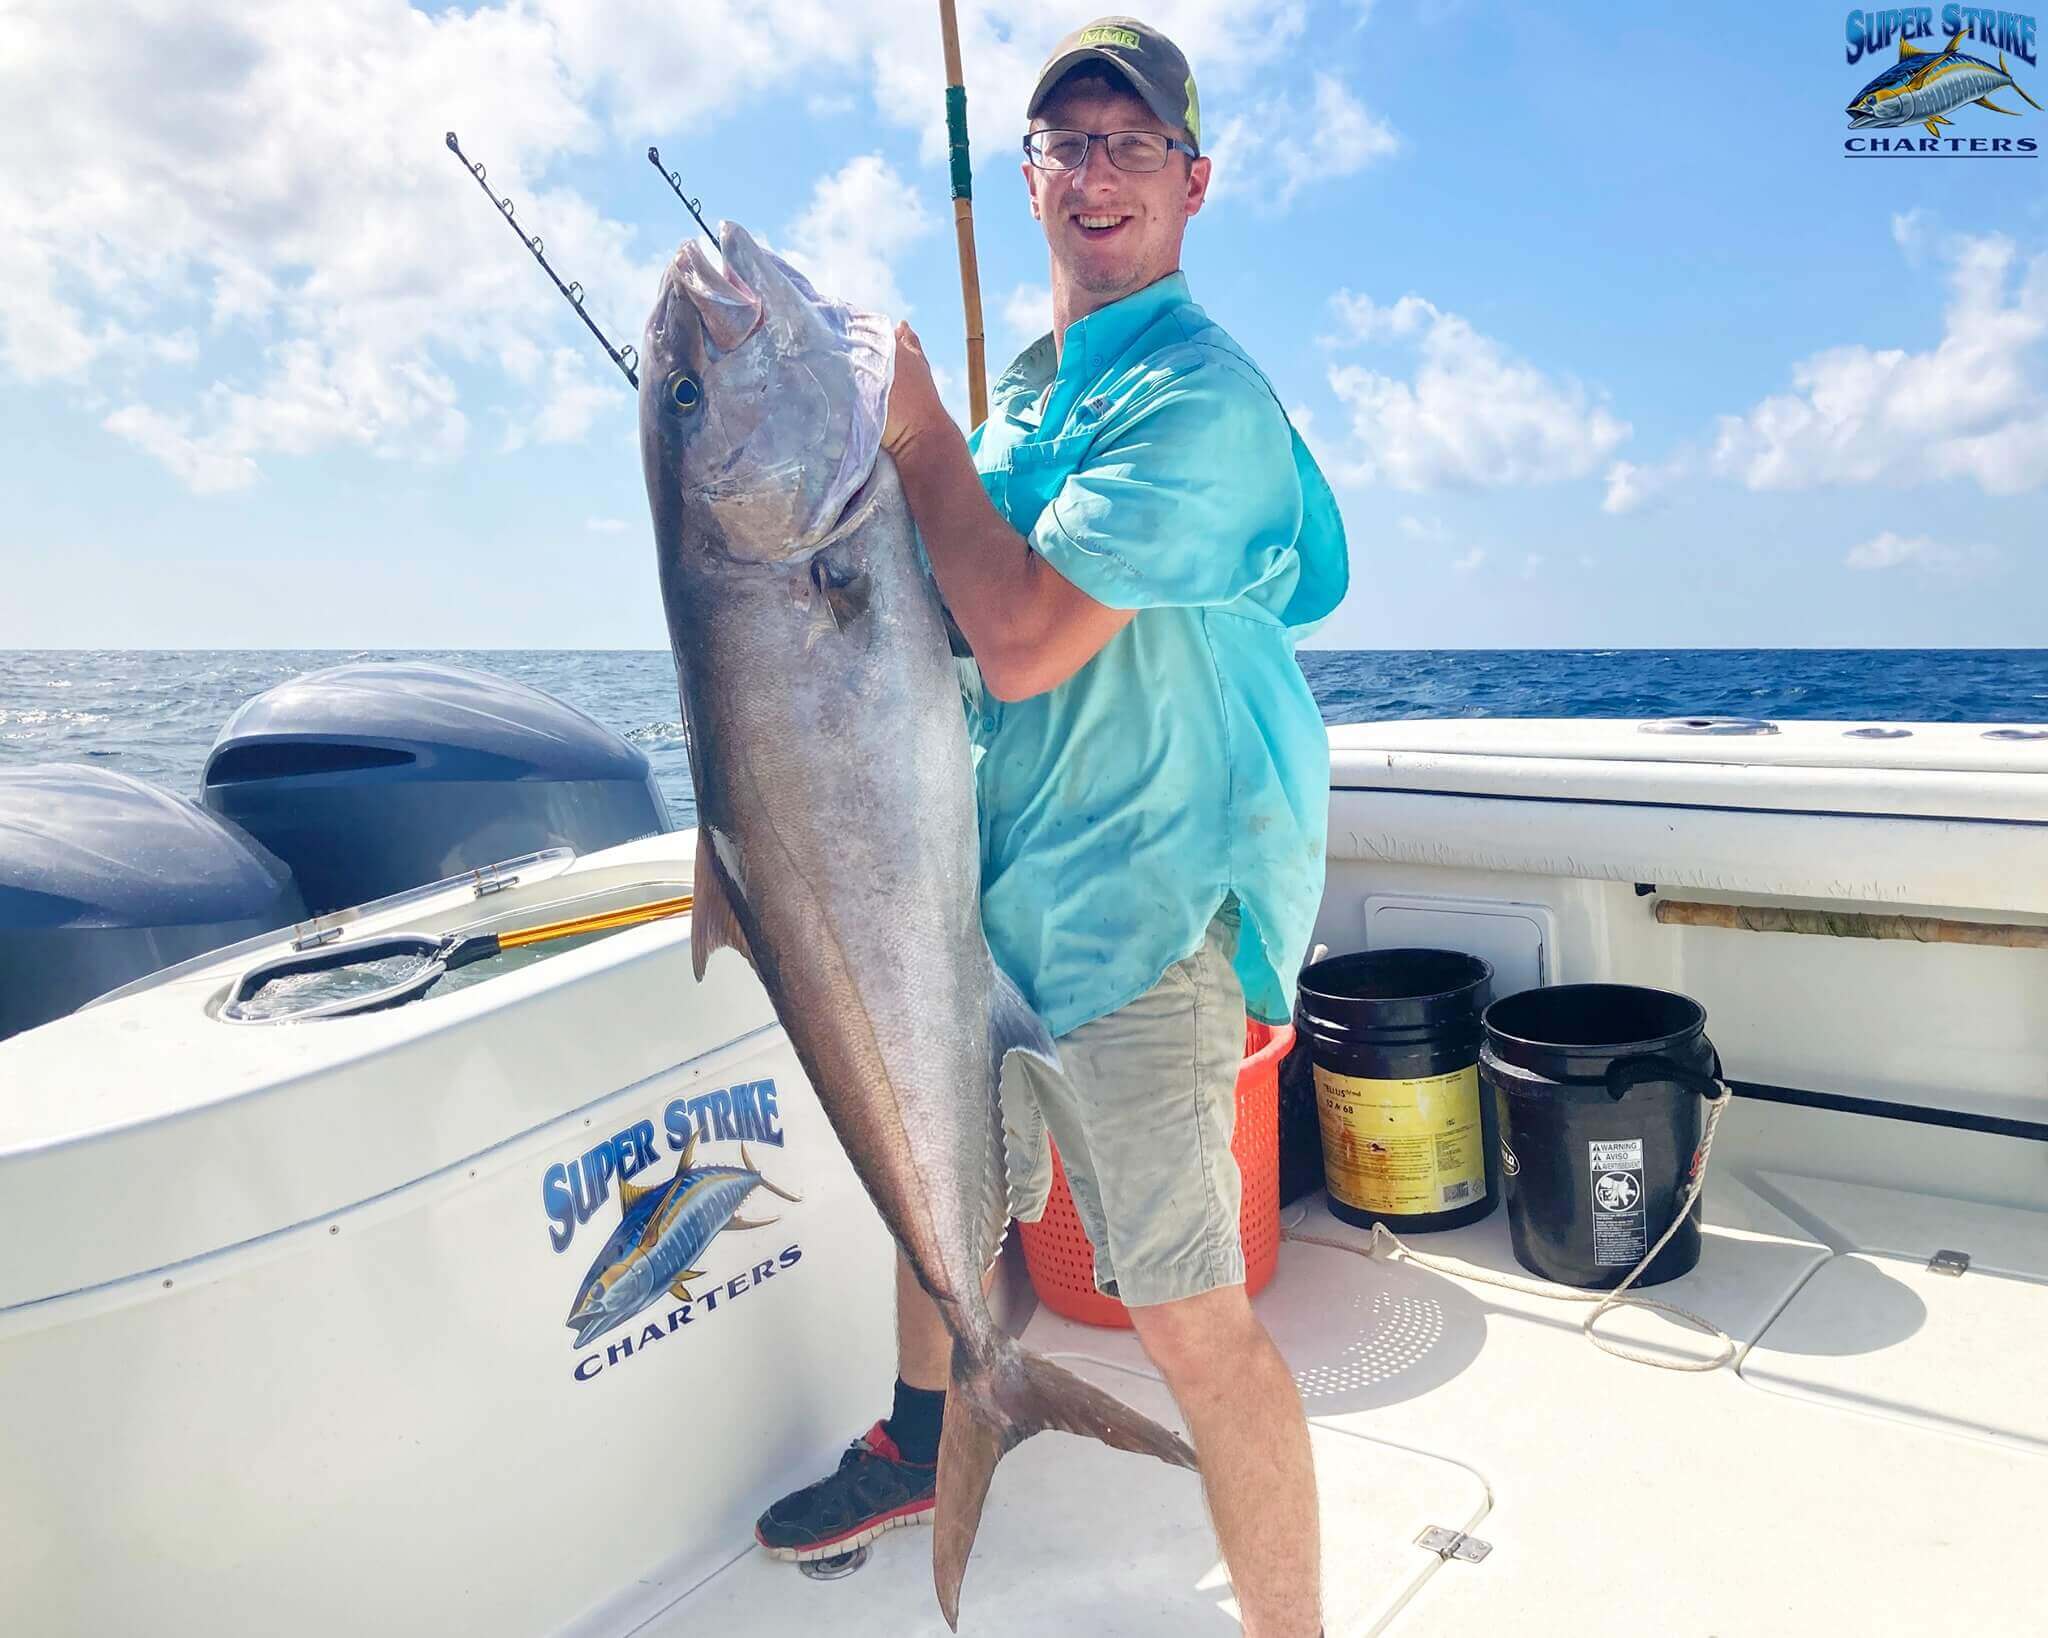 Catch Amberjack with Superstrike Charters